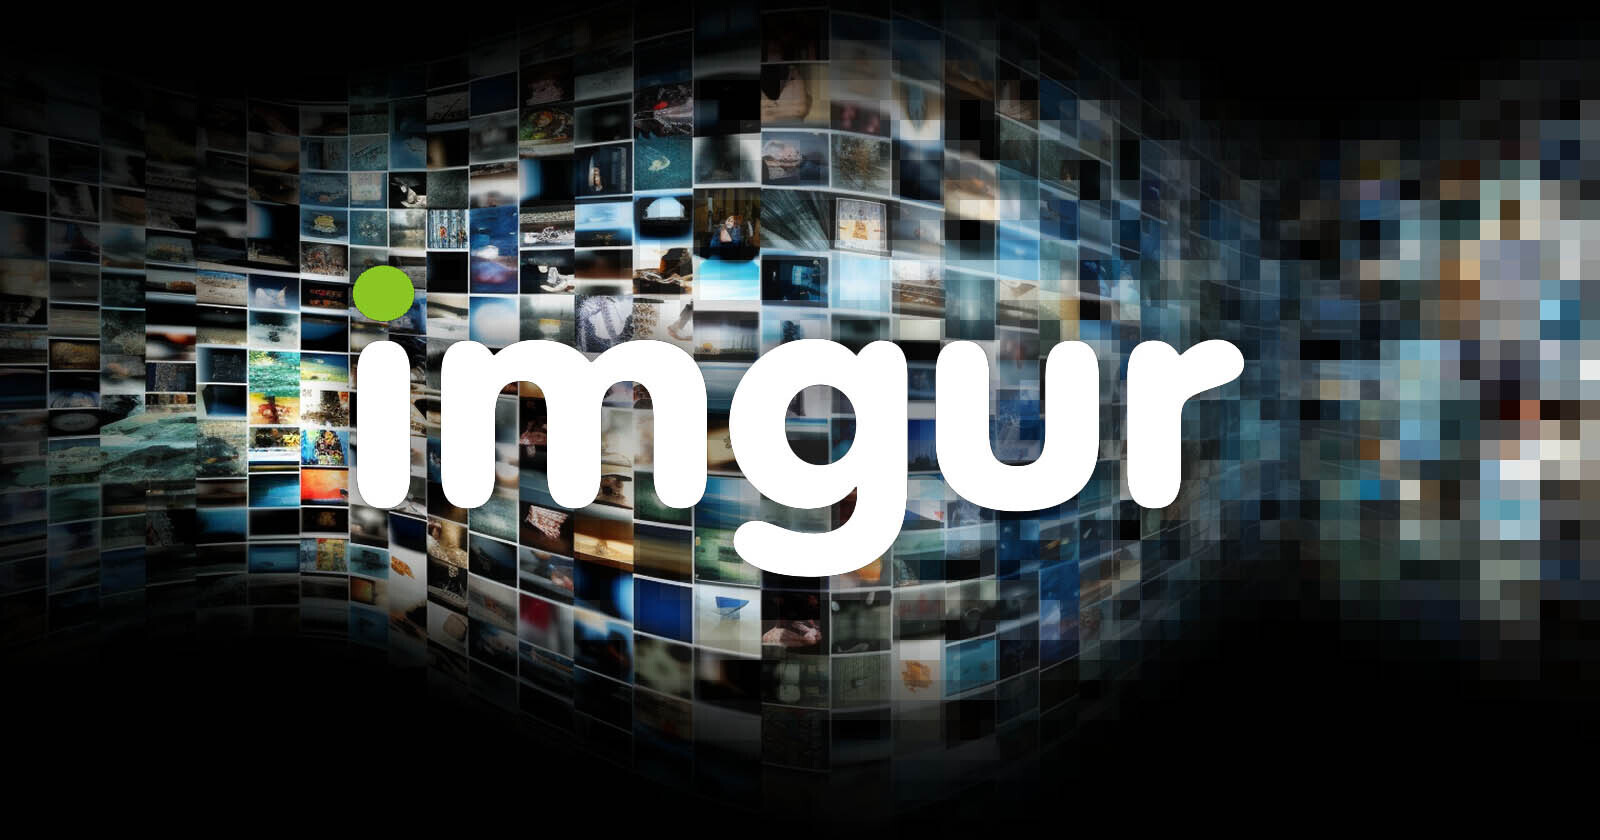 Imgur is Banning Explicit Content and Wiping Images Not Linked to Users